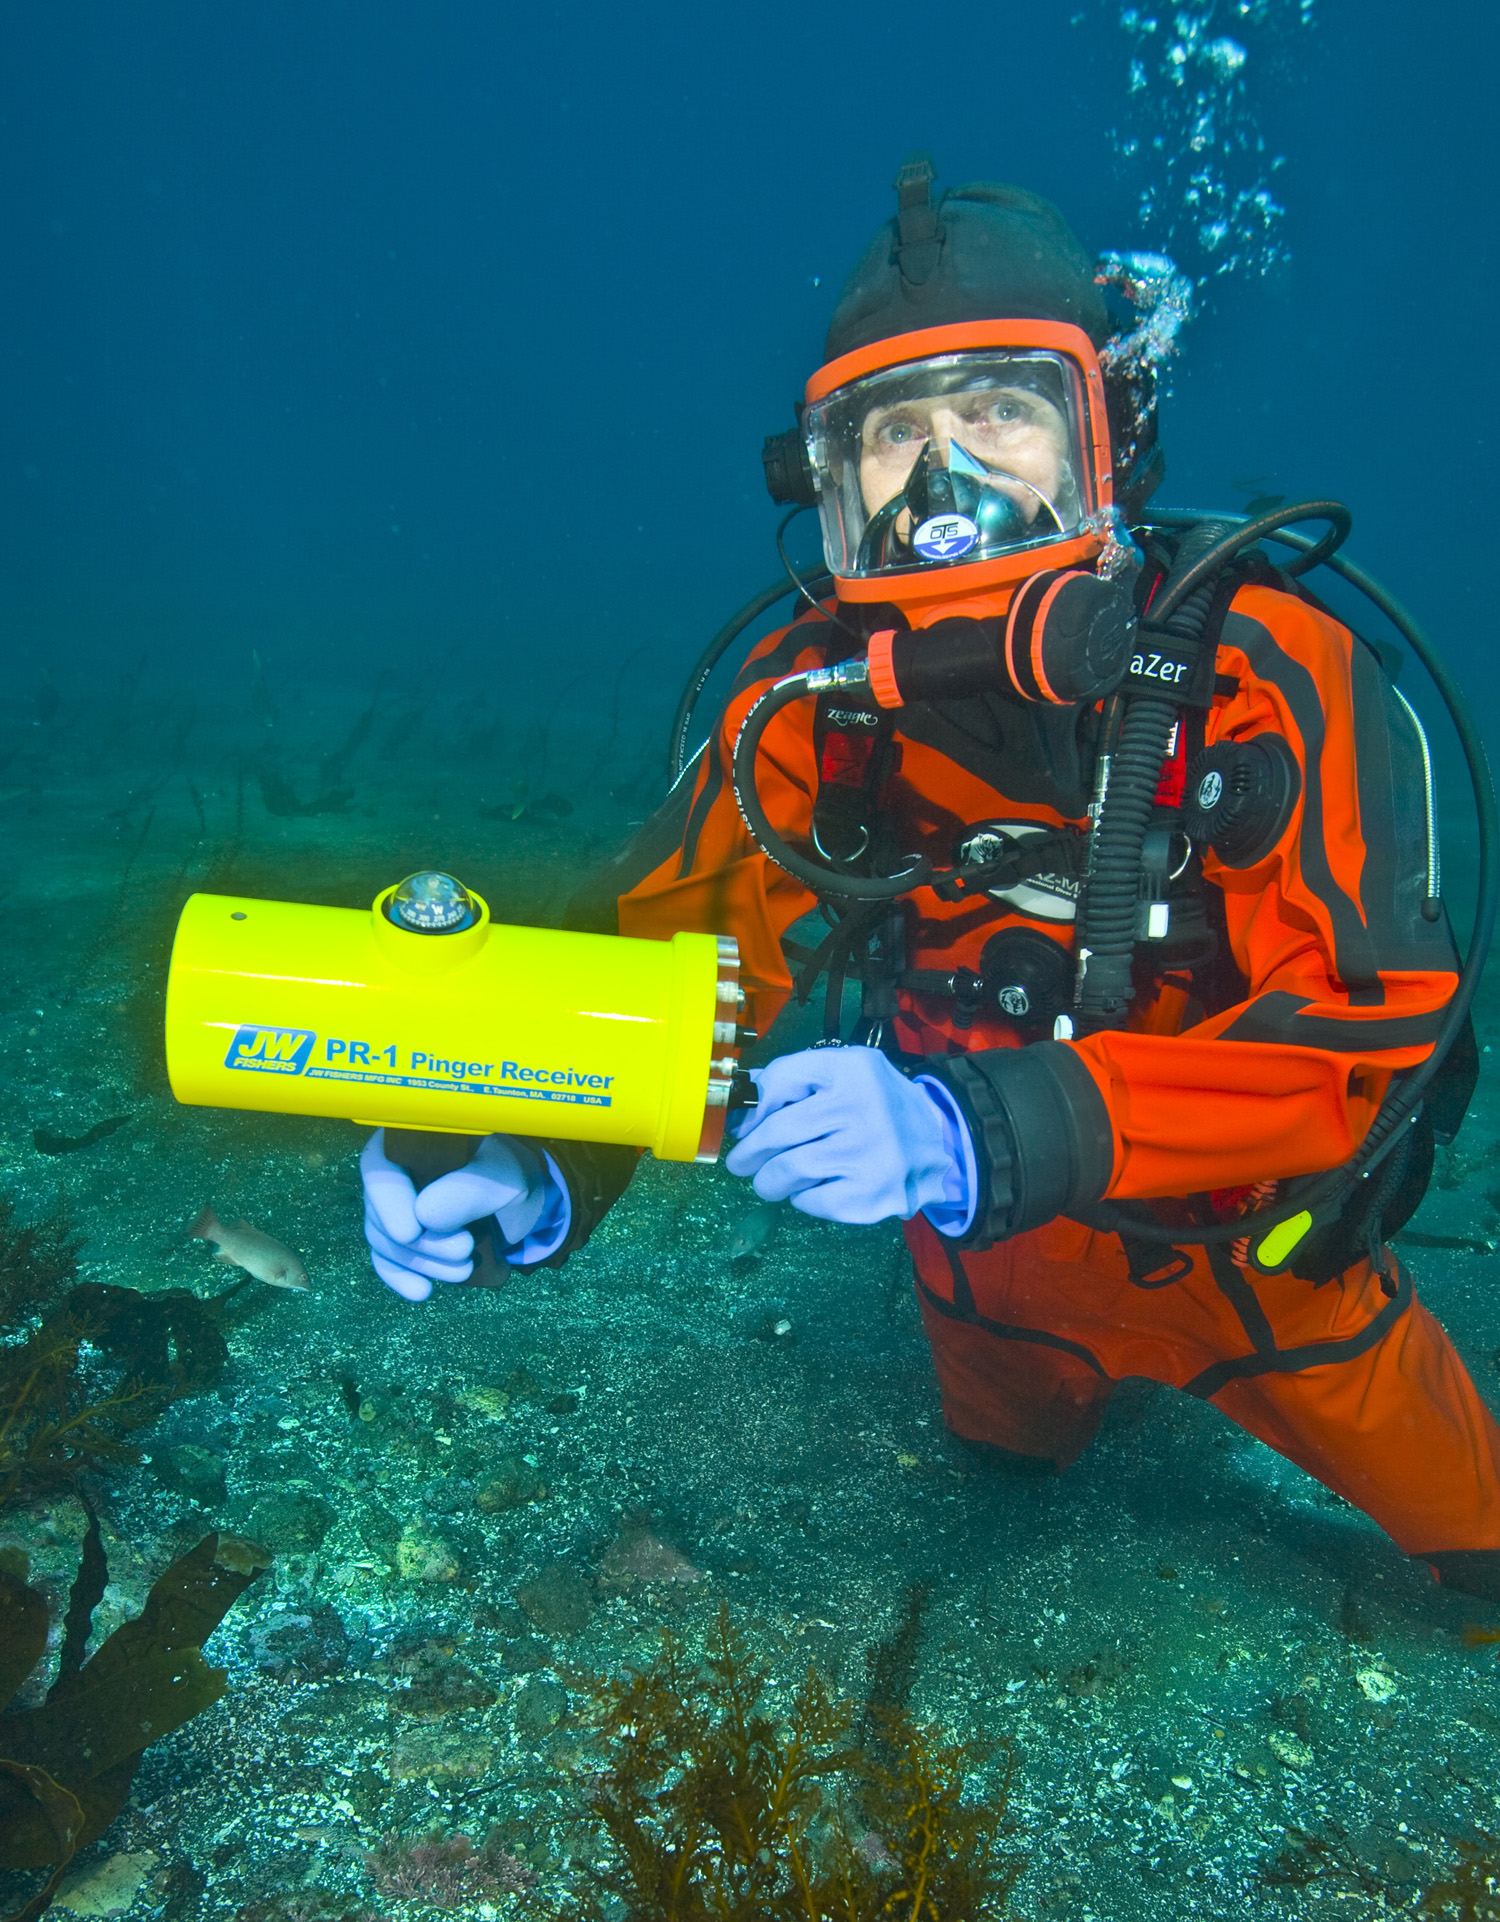 A diver holding a PR-1 under water